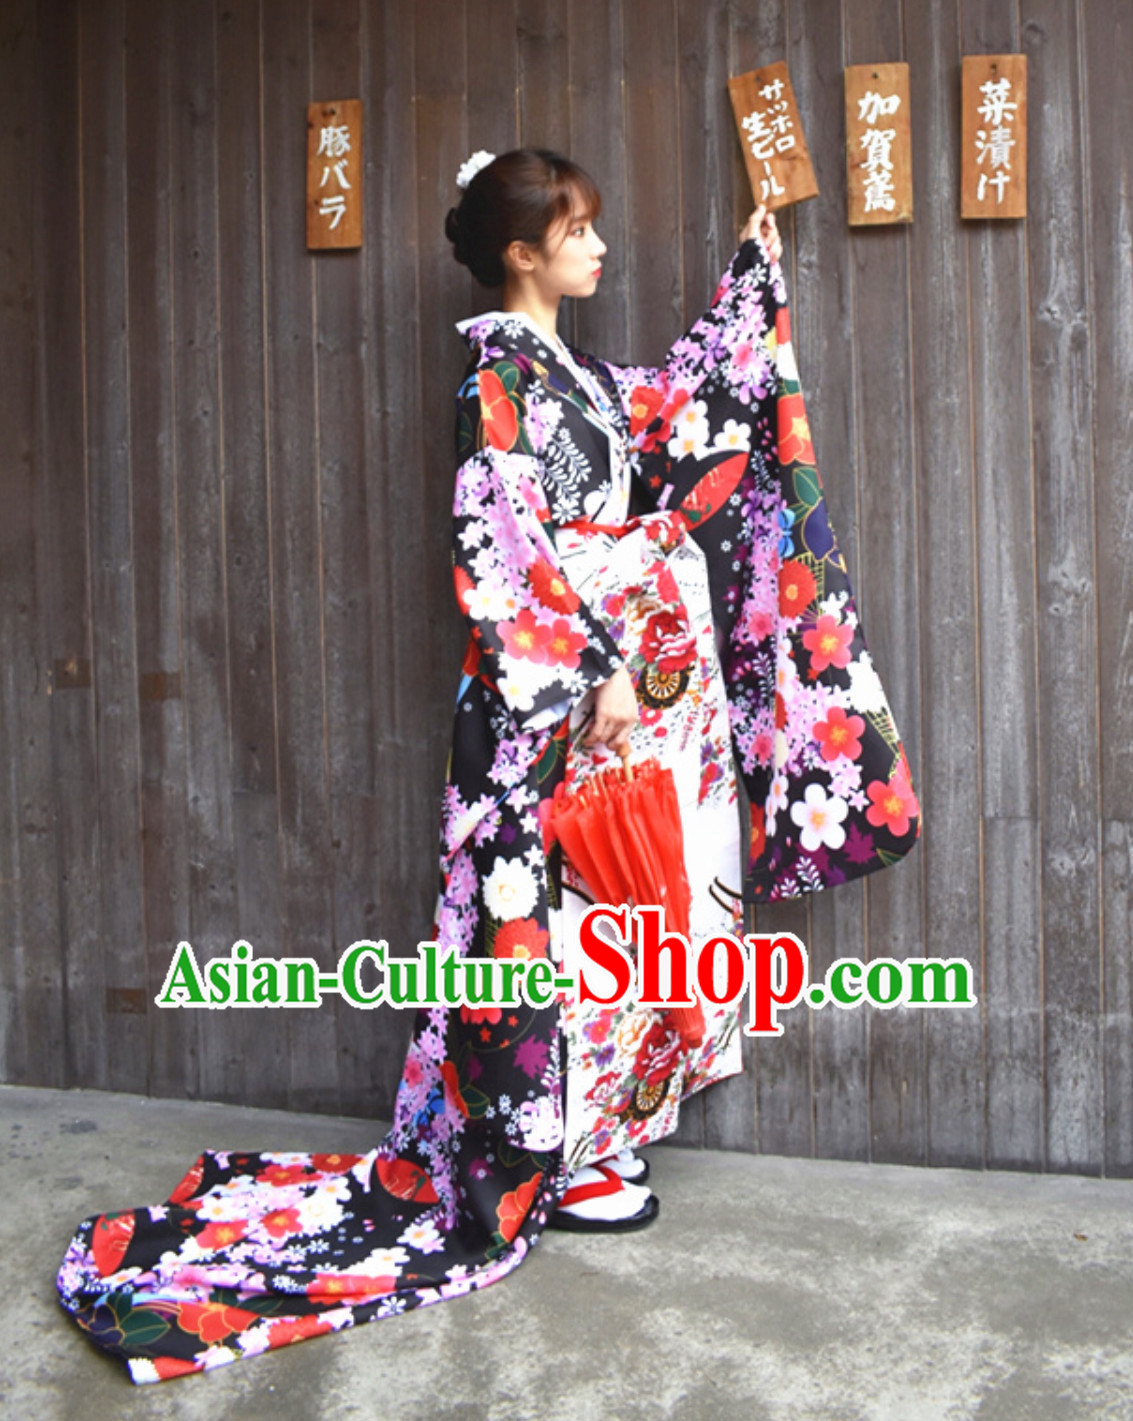 Classical Asian Japan Clothing Japanese Fashion Apparel Printing Furisode Kimono Costume Complete Set for Women